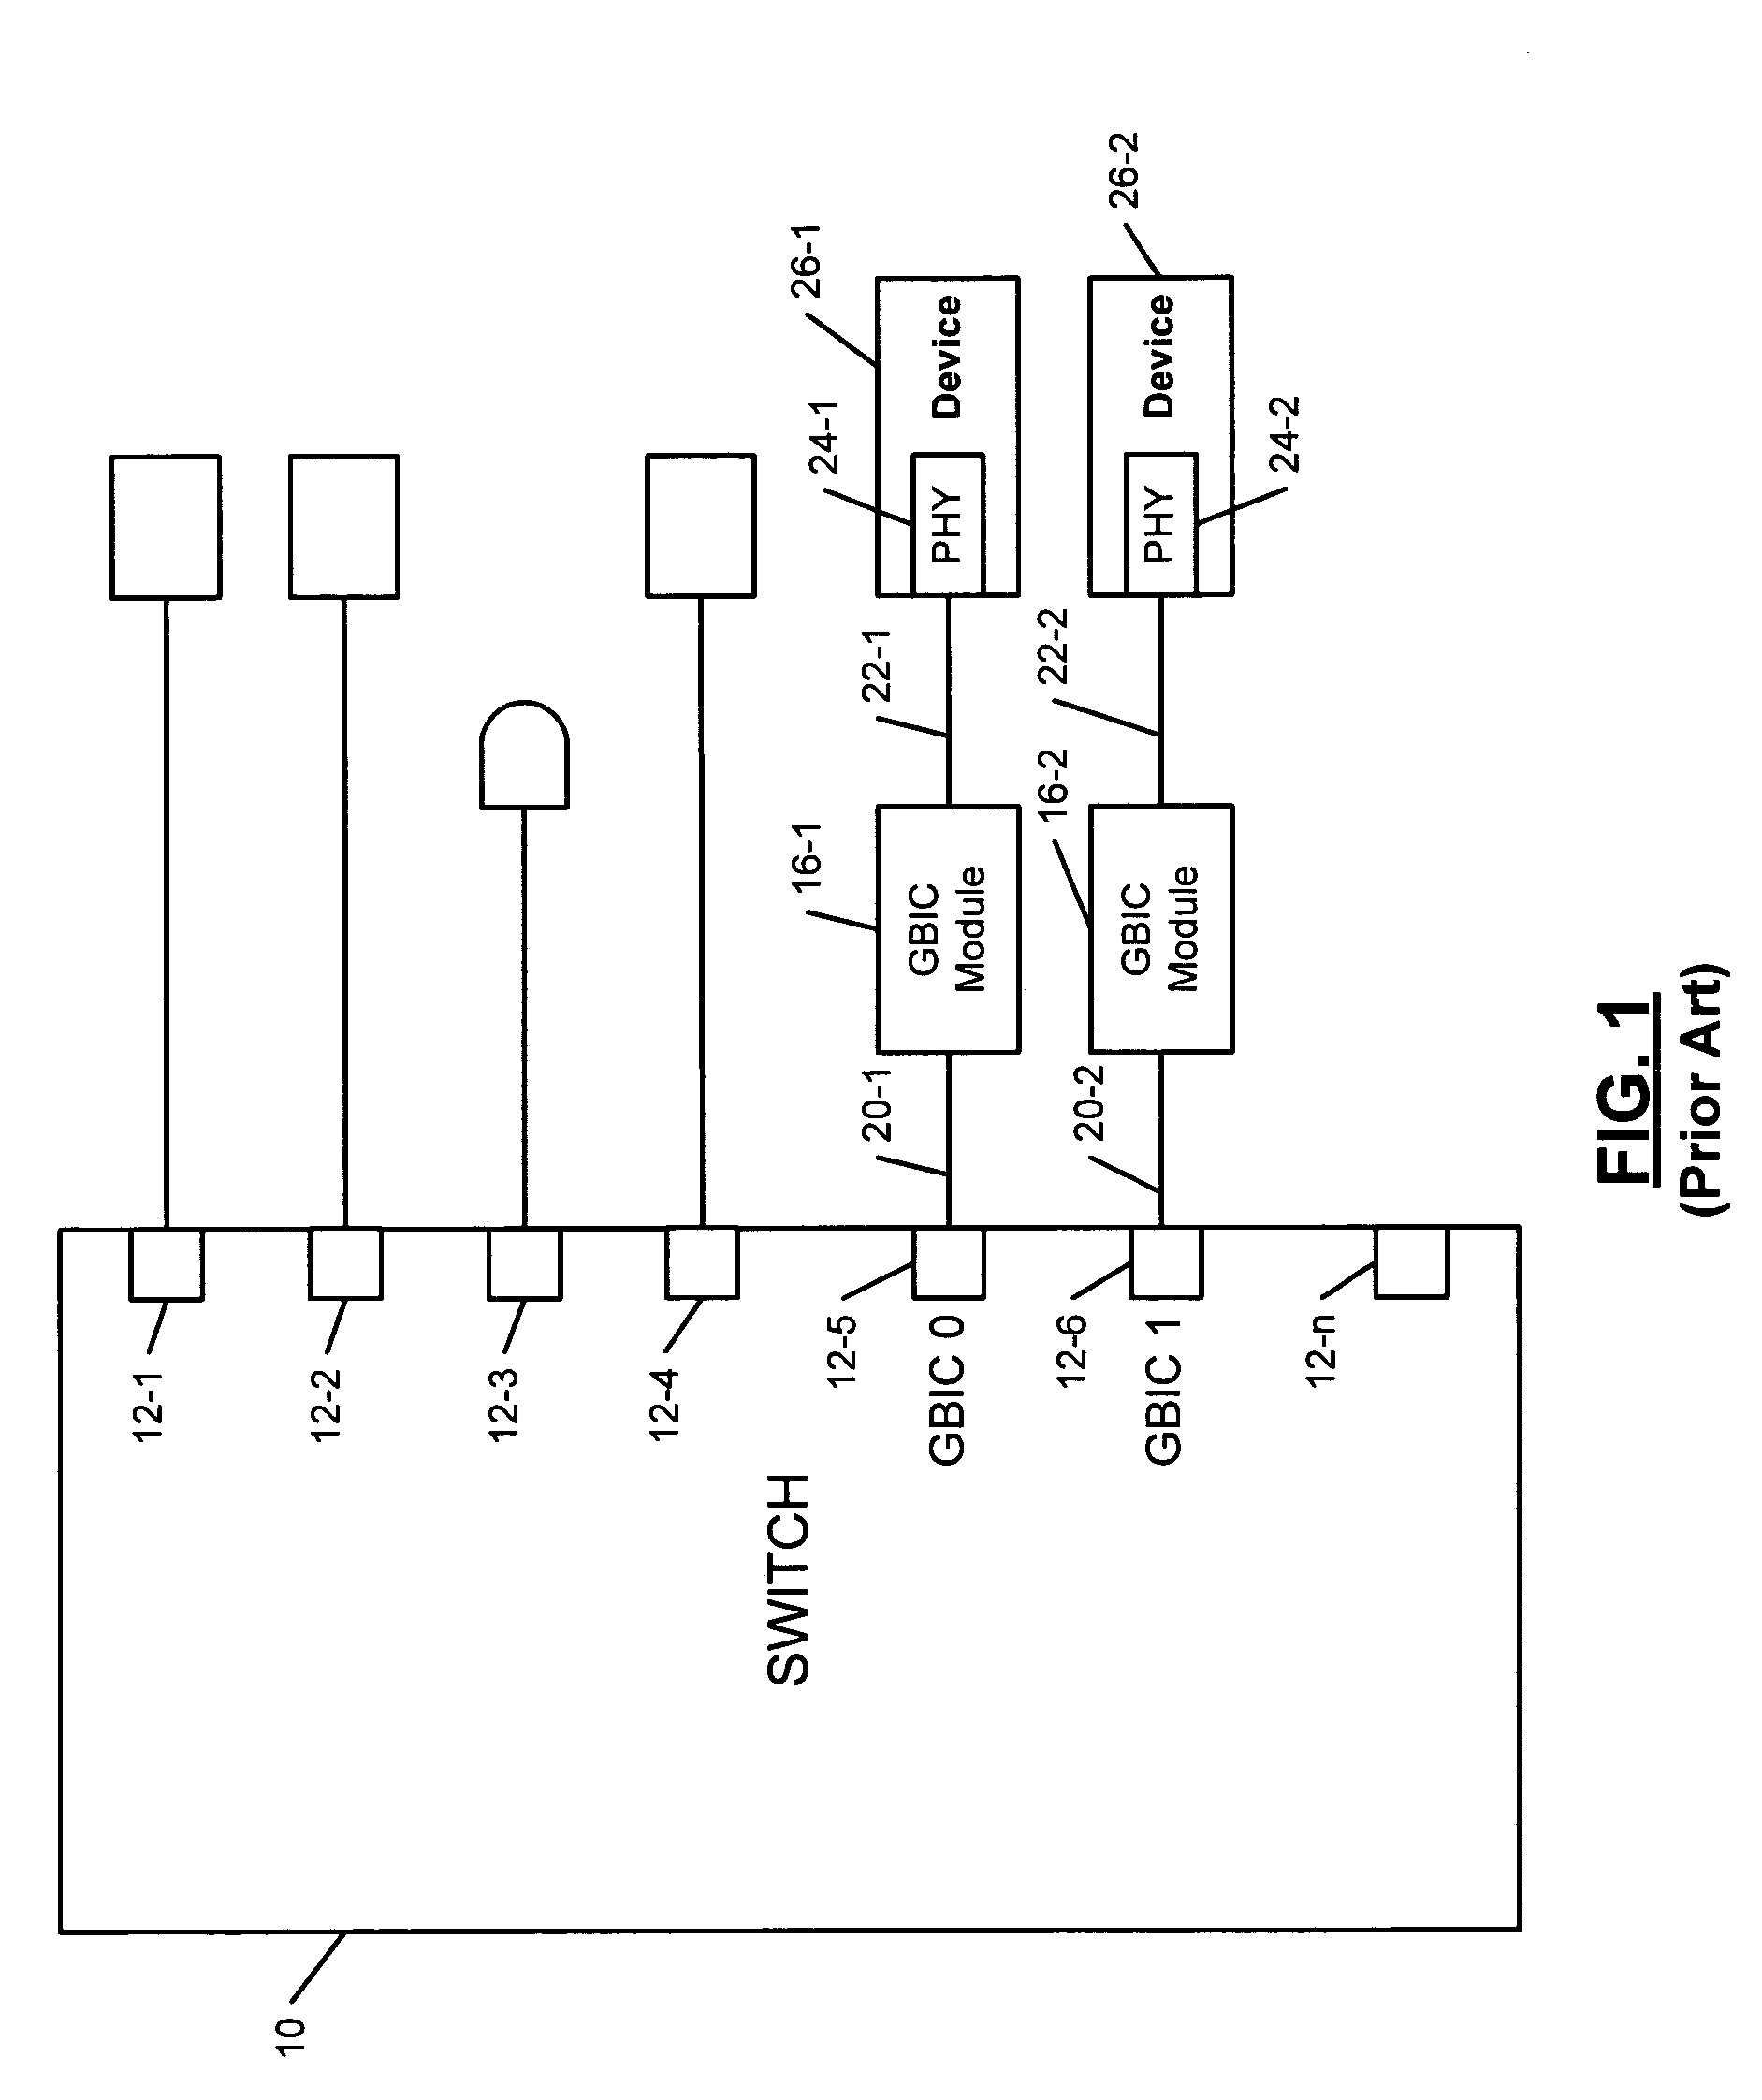 Autonegotiation between 1000Base-X and 1000Base-T